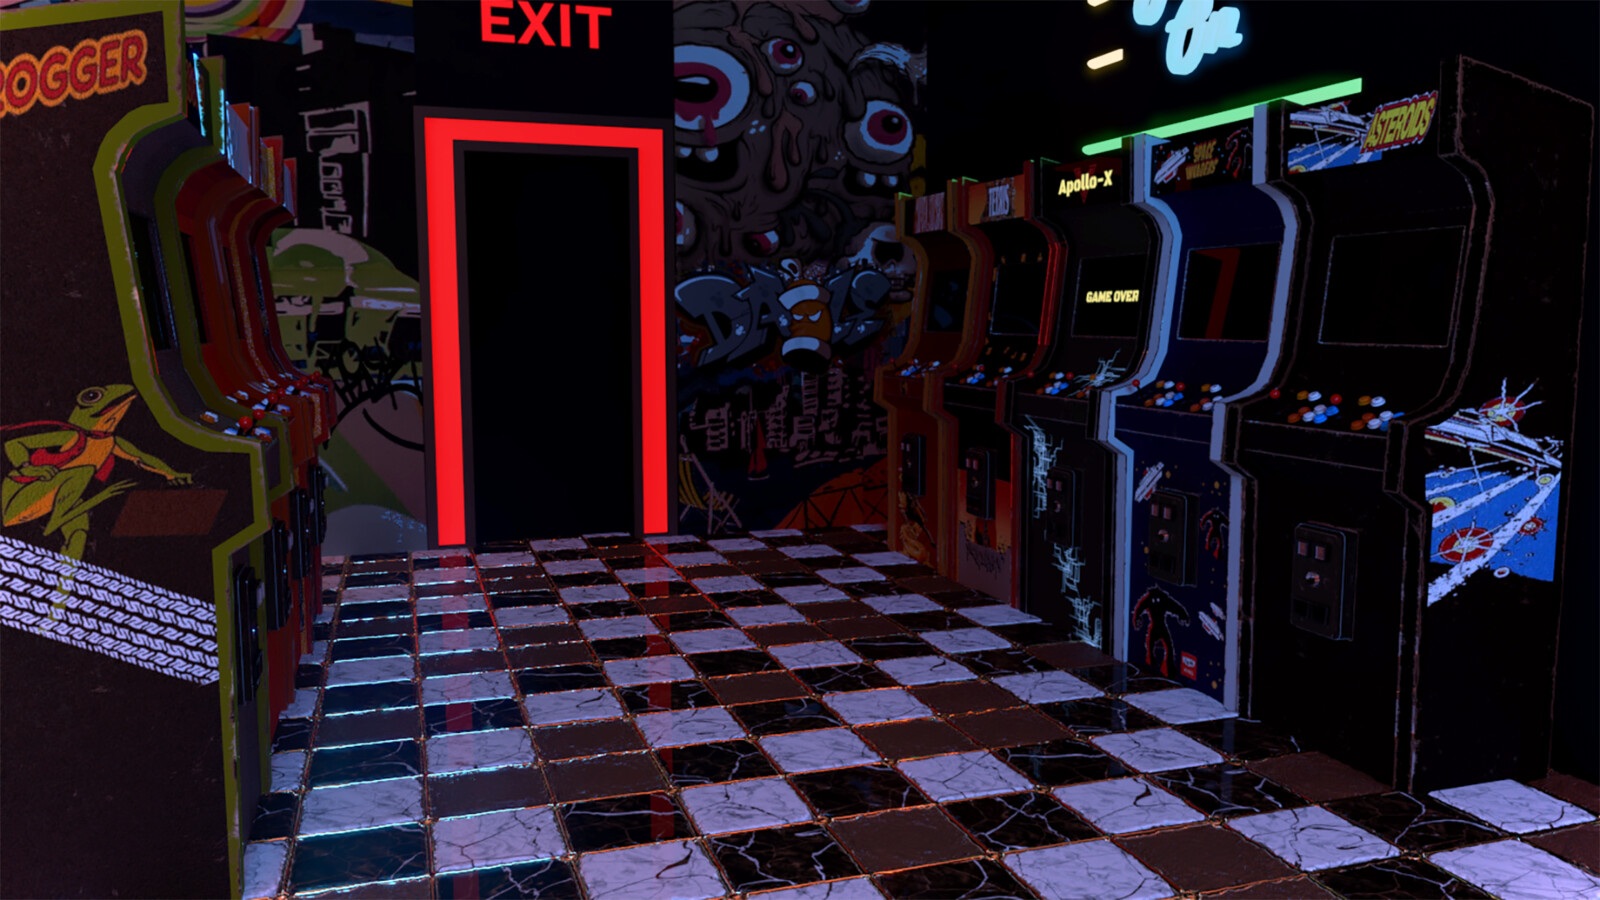 Material used in the Arcade environment